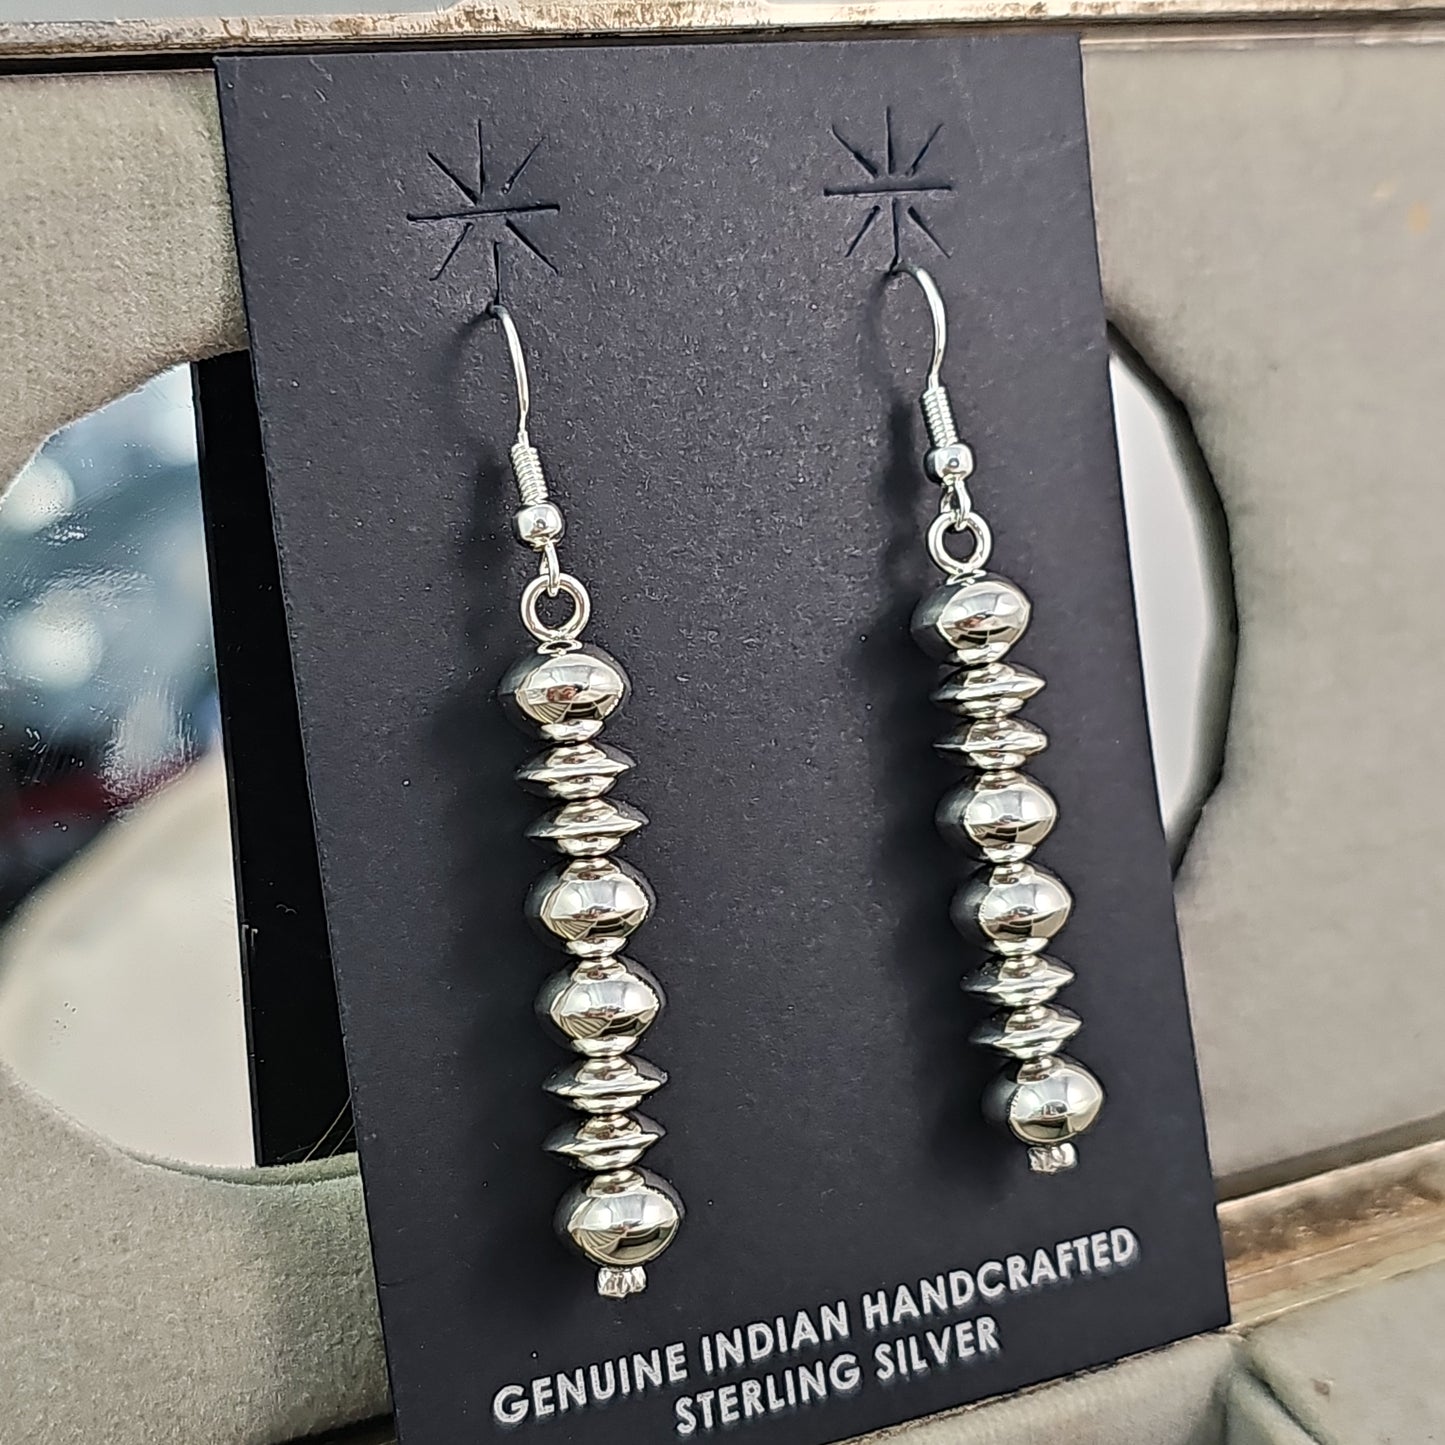 Navajo pearl earrings with saucer bead accents.